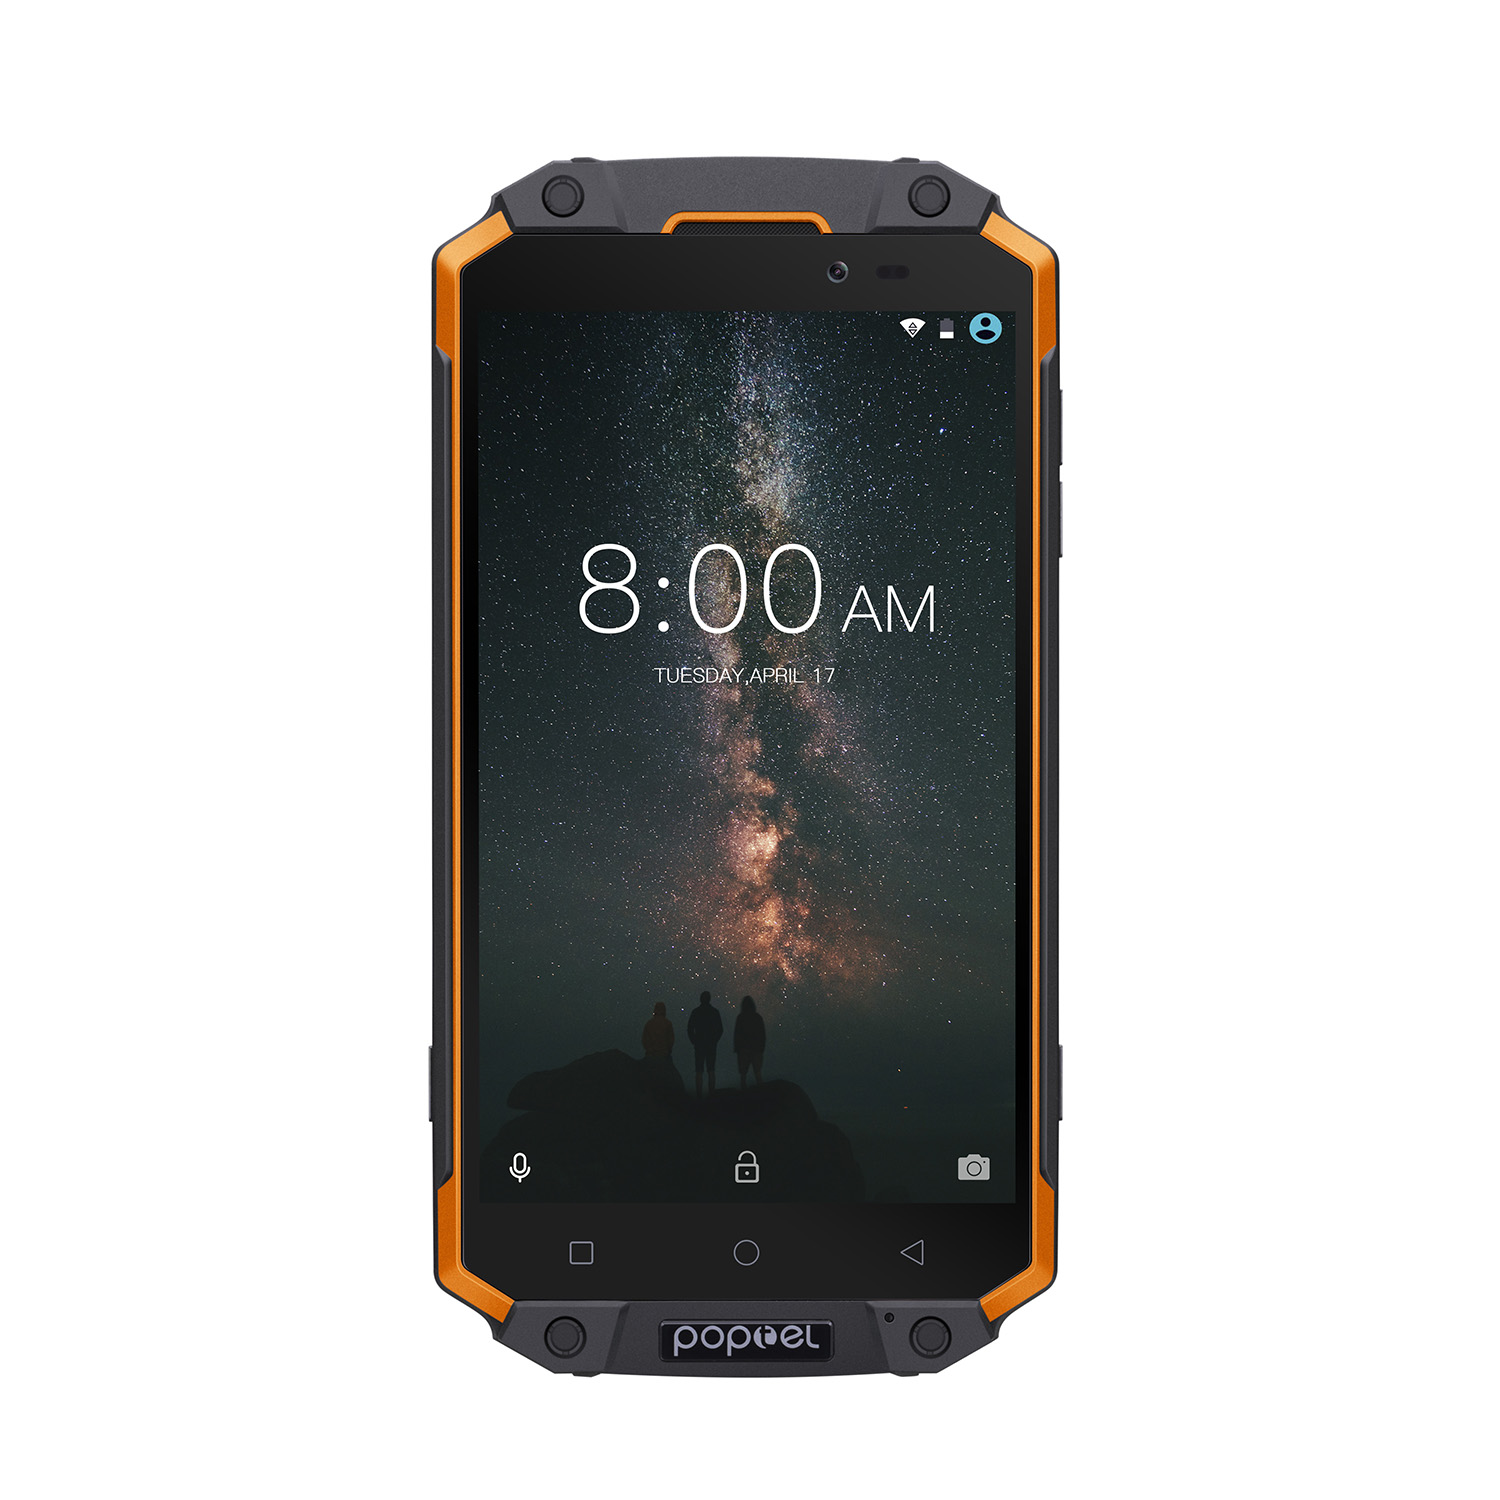 POPTEL P9000 MAX Android Phone - Android 7.0-4GB RAM, 5.5-Inch FHD, IP68, Dual-IMEI